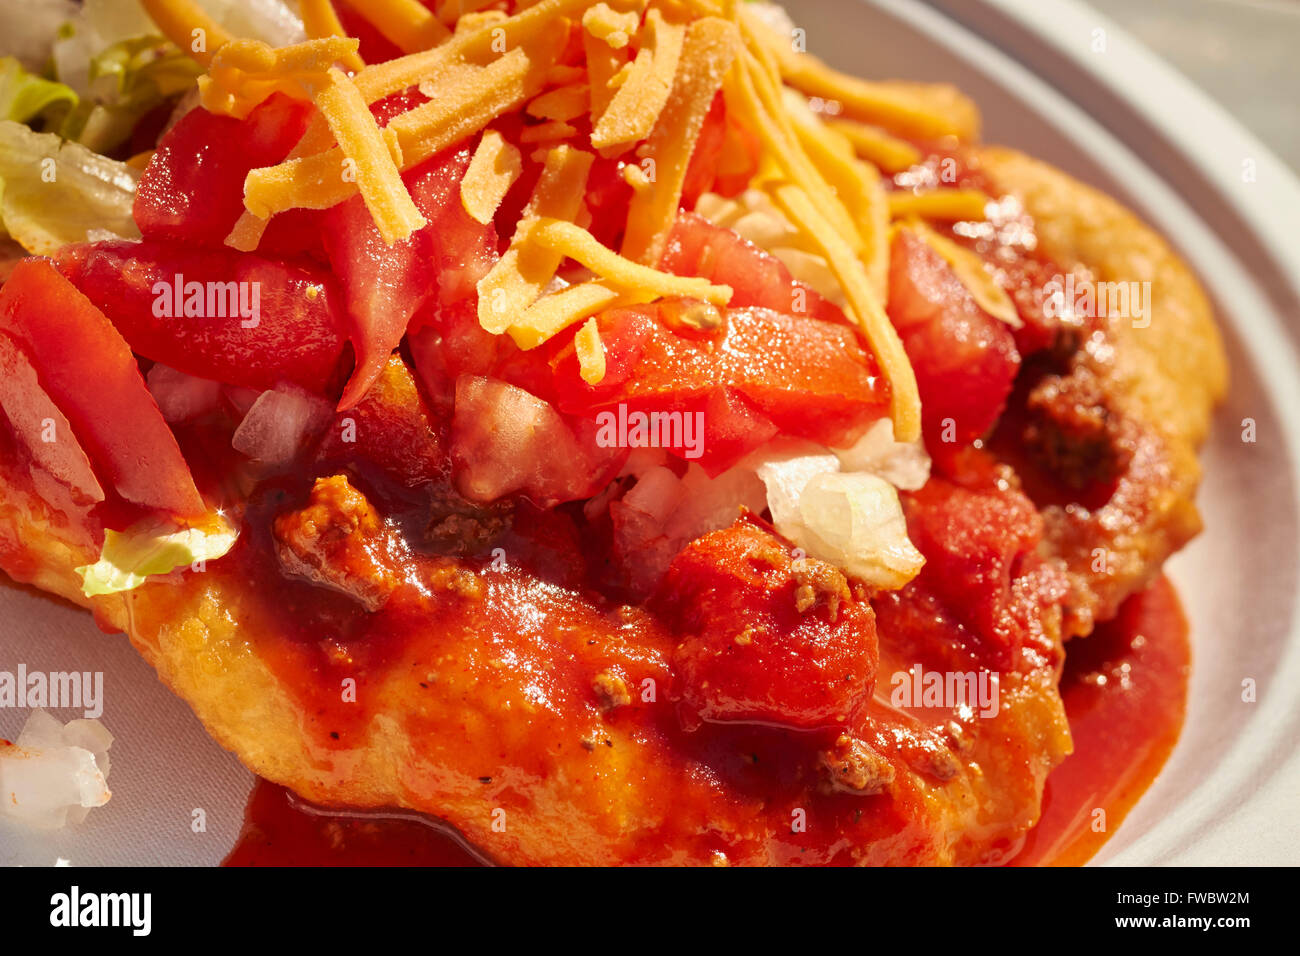 Modern Native American cooking; a piece of frybread covered with chili, lettuce, tomato and cheese shreds, an Indian Taco Stock Photo